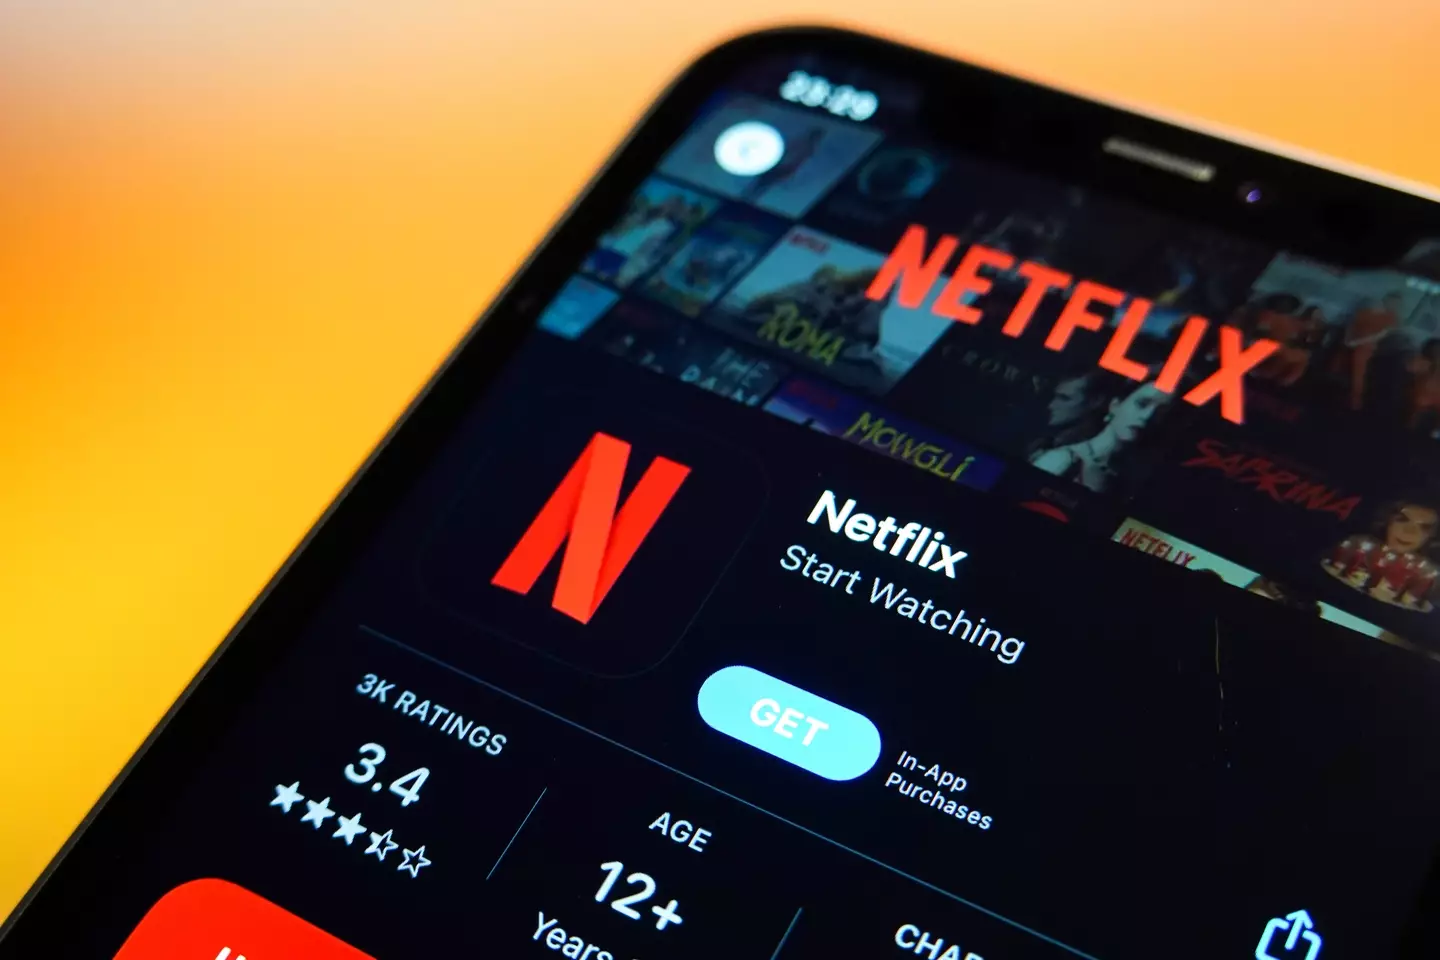 Most of us pay to watch Netflix.